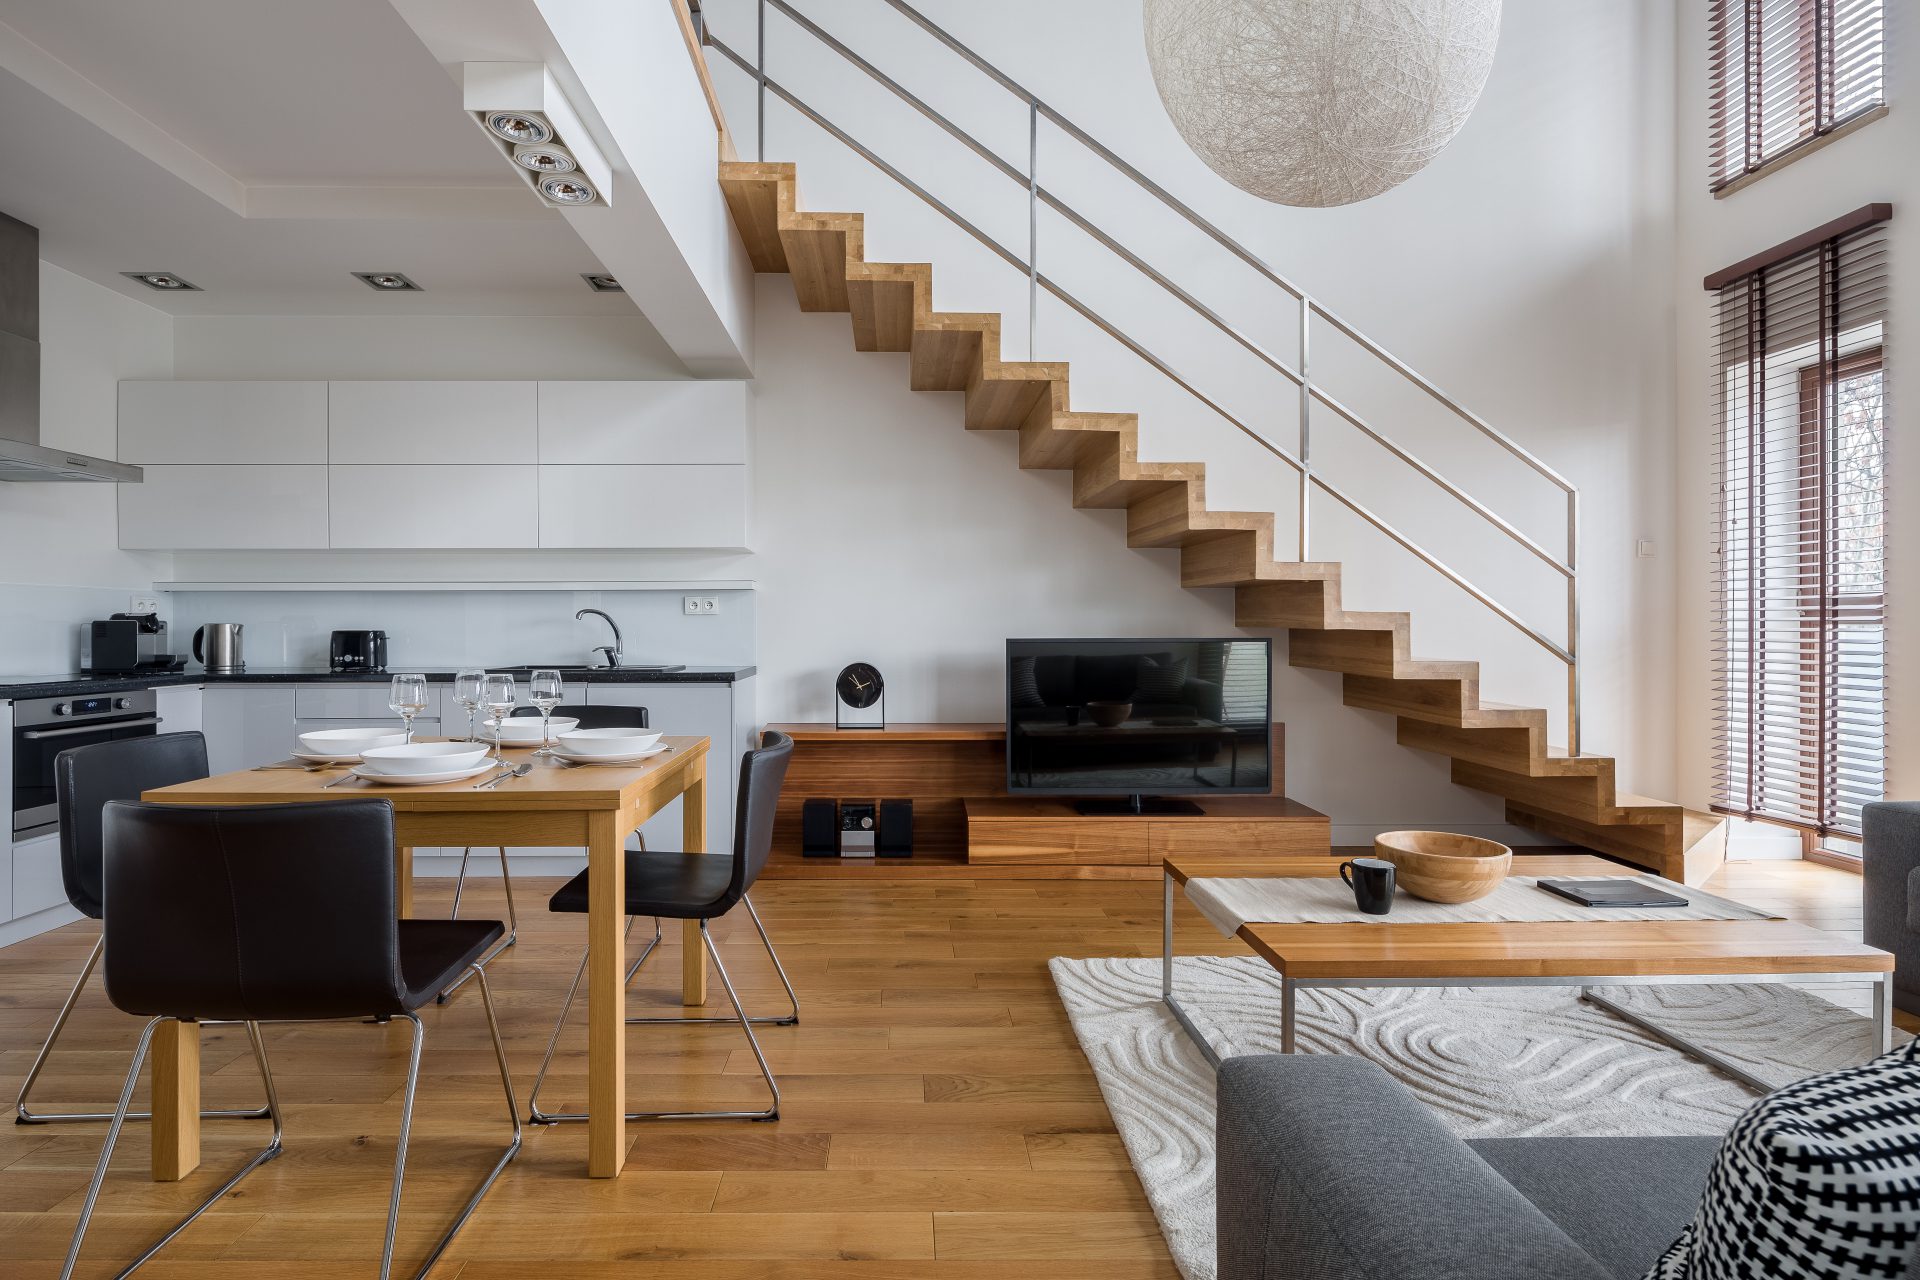 Why Do Wooden Stairs Look Better Than Other Kinds of Stairs?